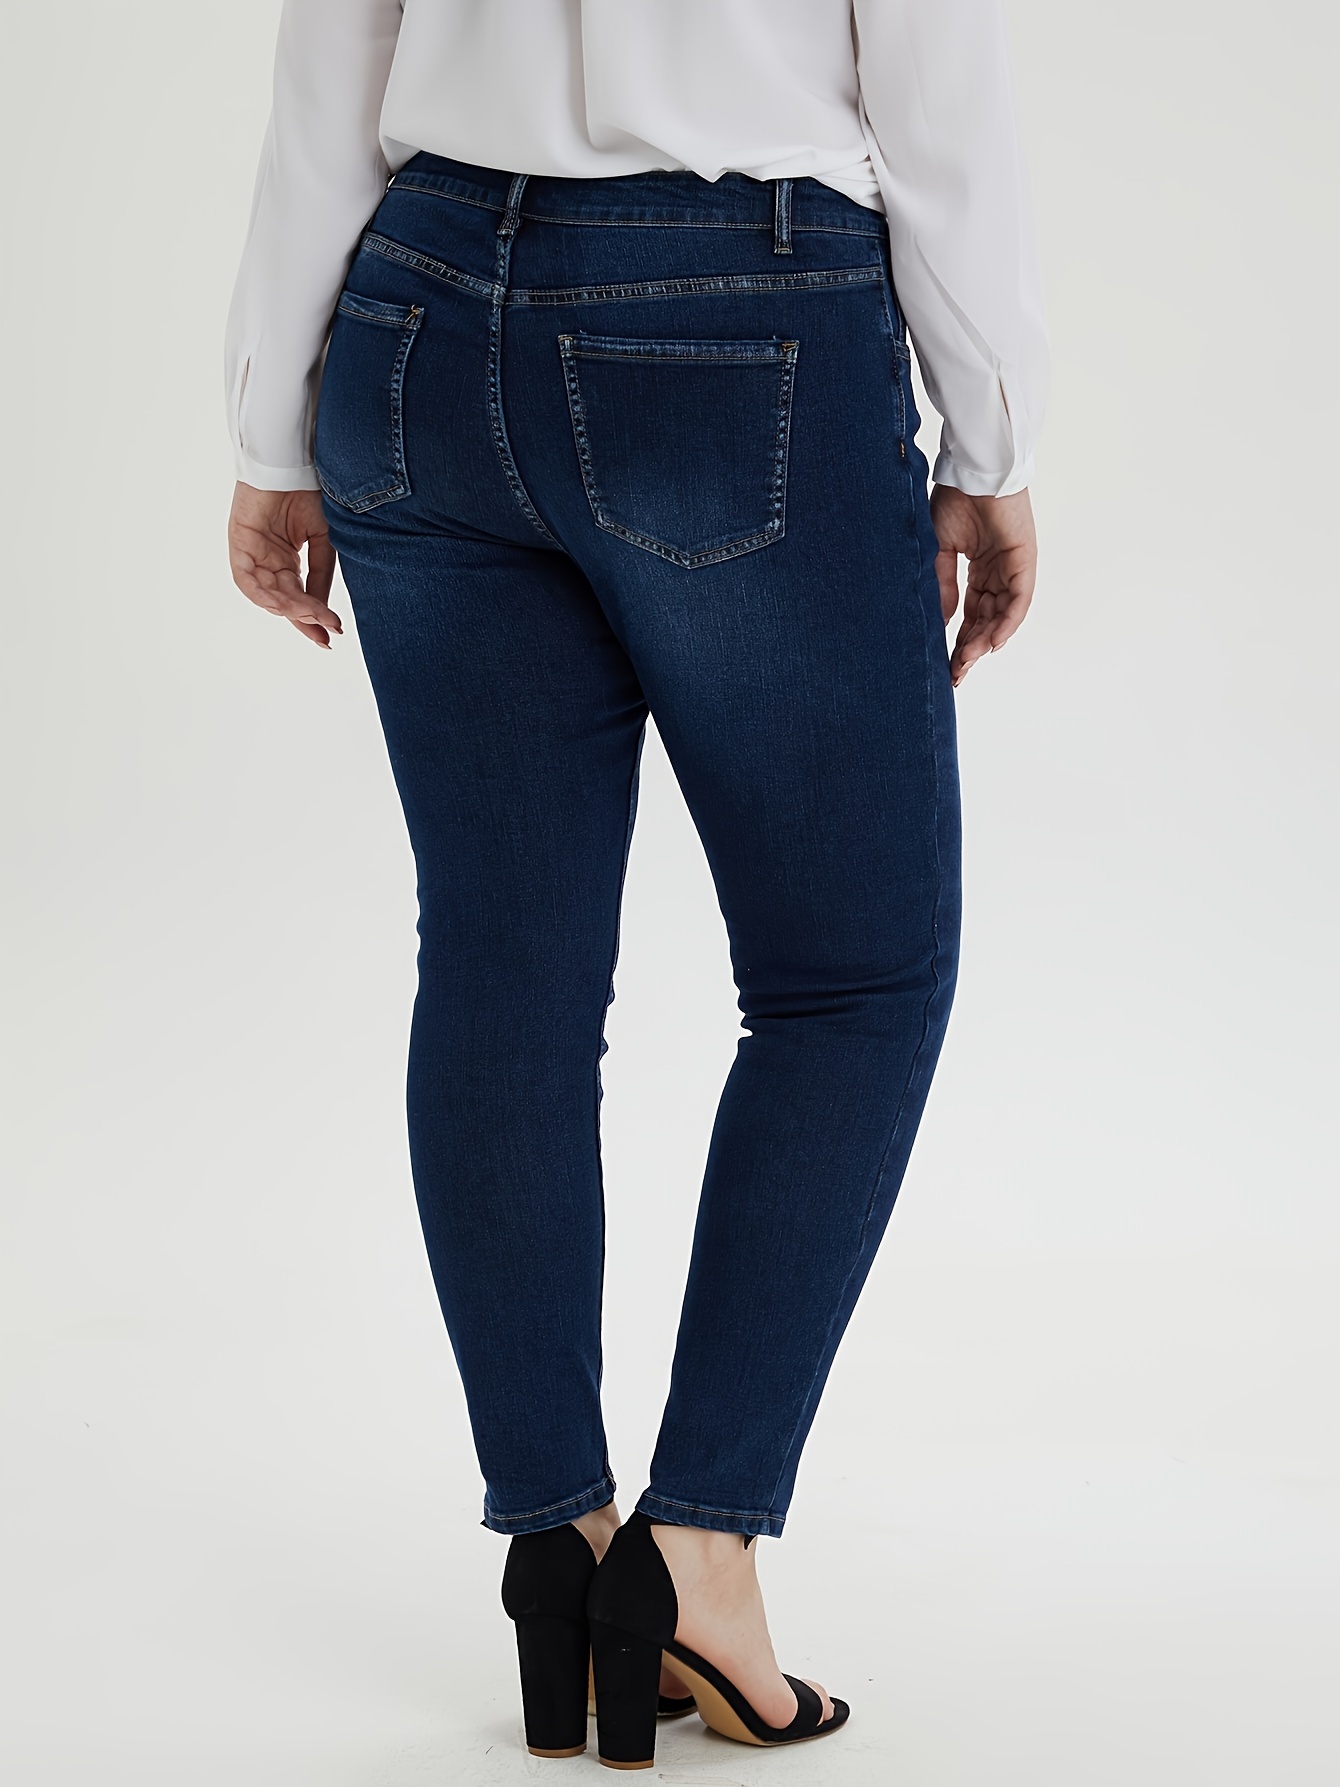 PLUS SIZE WOMEN SHADED CASUAL NAVY BLUE JEANS